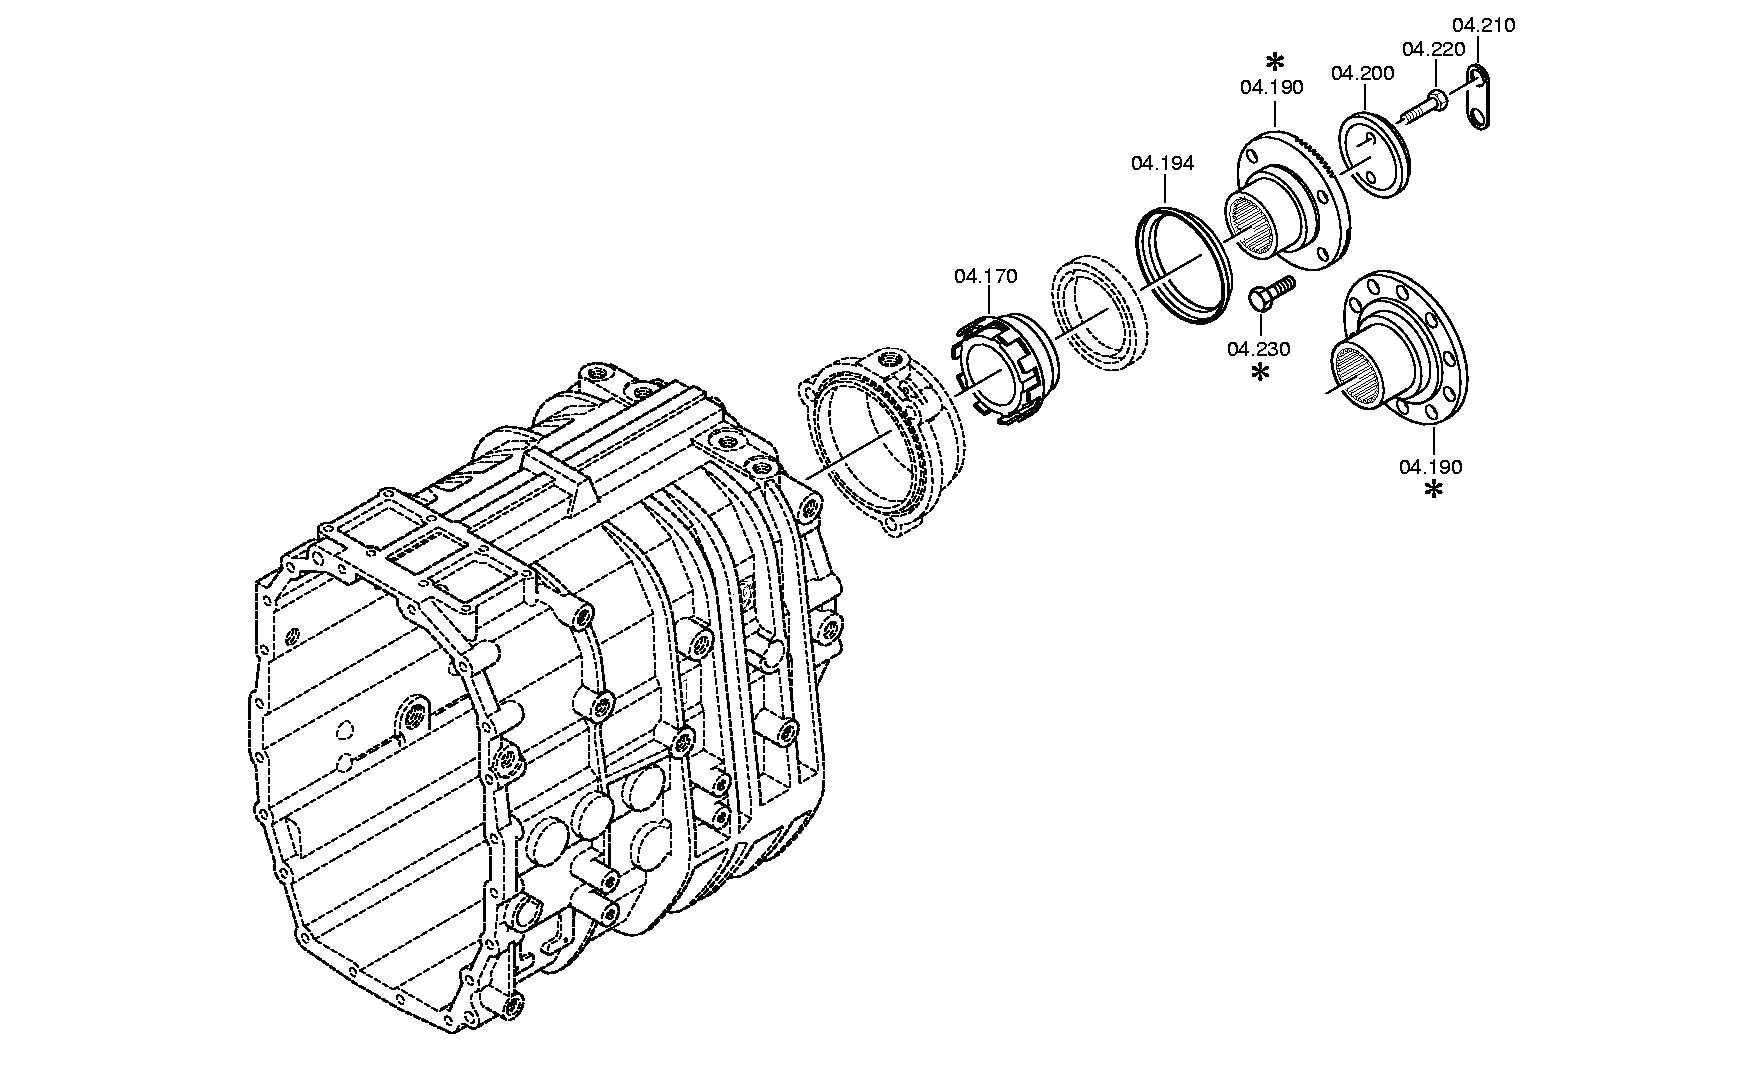 drawing for YAXING-BENZ LTD. 81.32312-0399 - WASHER (figure 5)